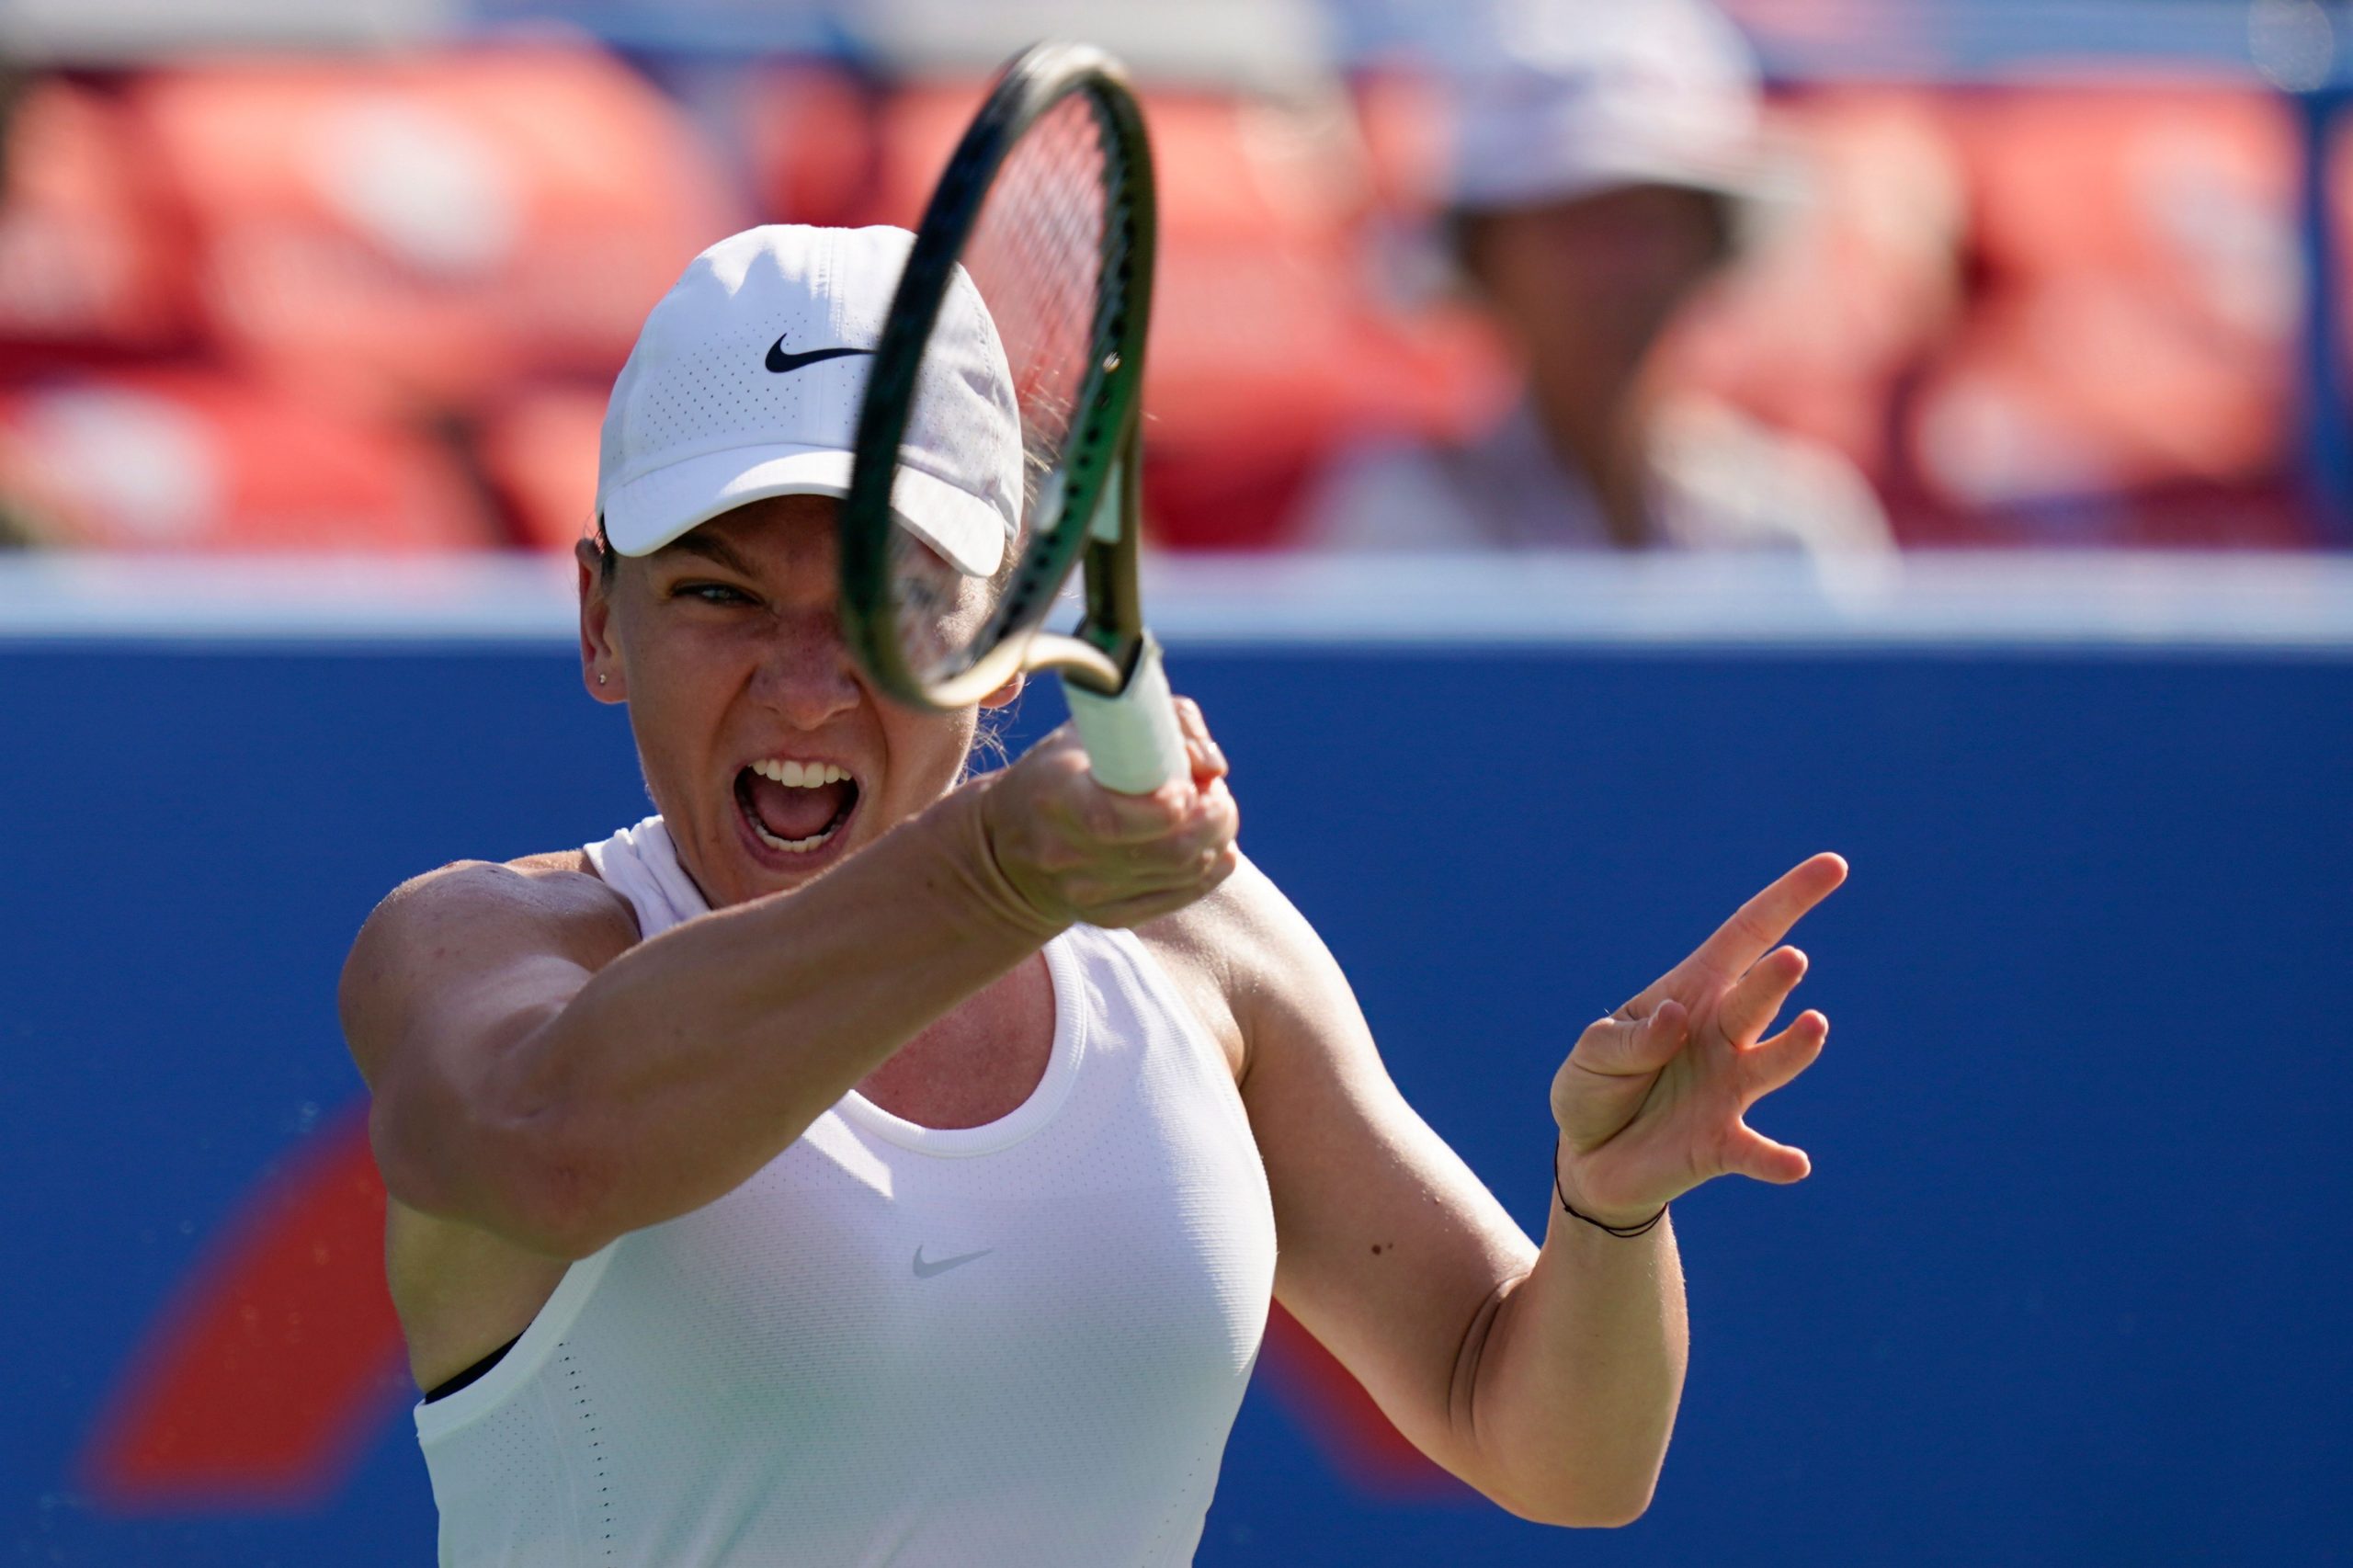 Simona Halep, Romanian tennis star, provisionally suspended for doping